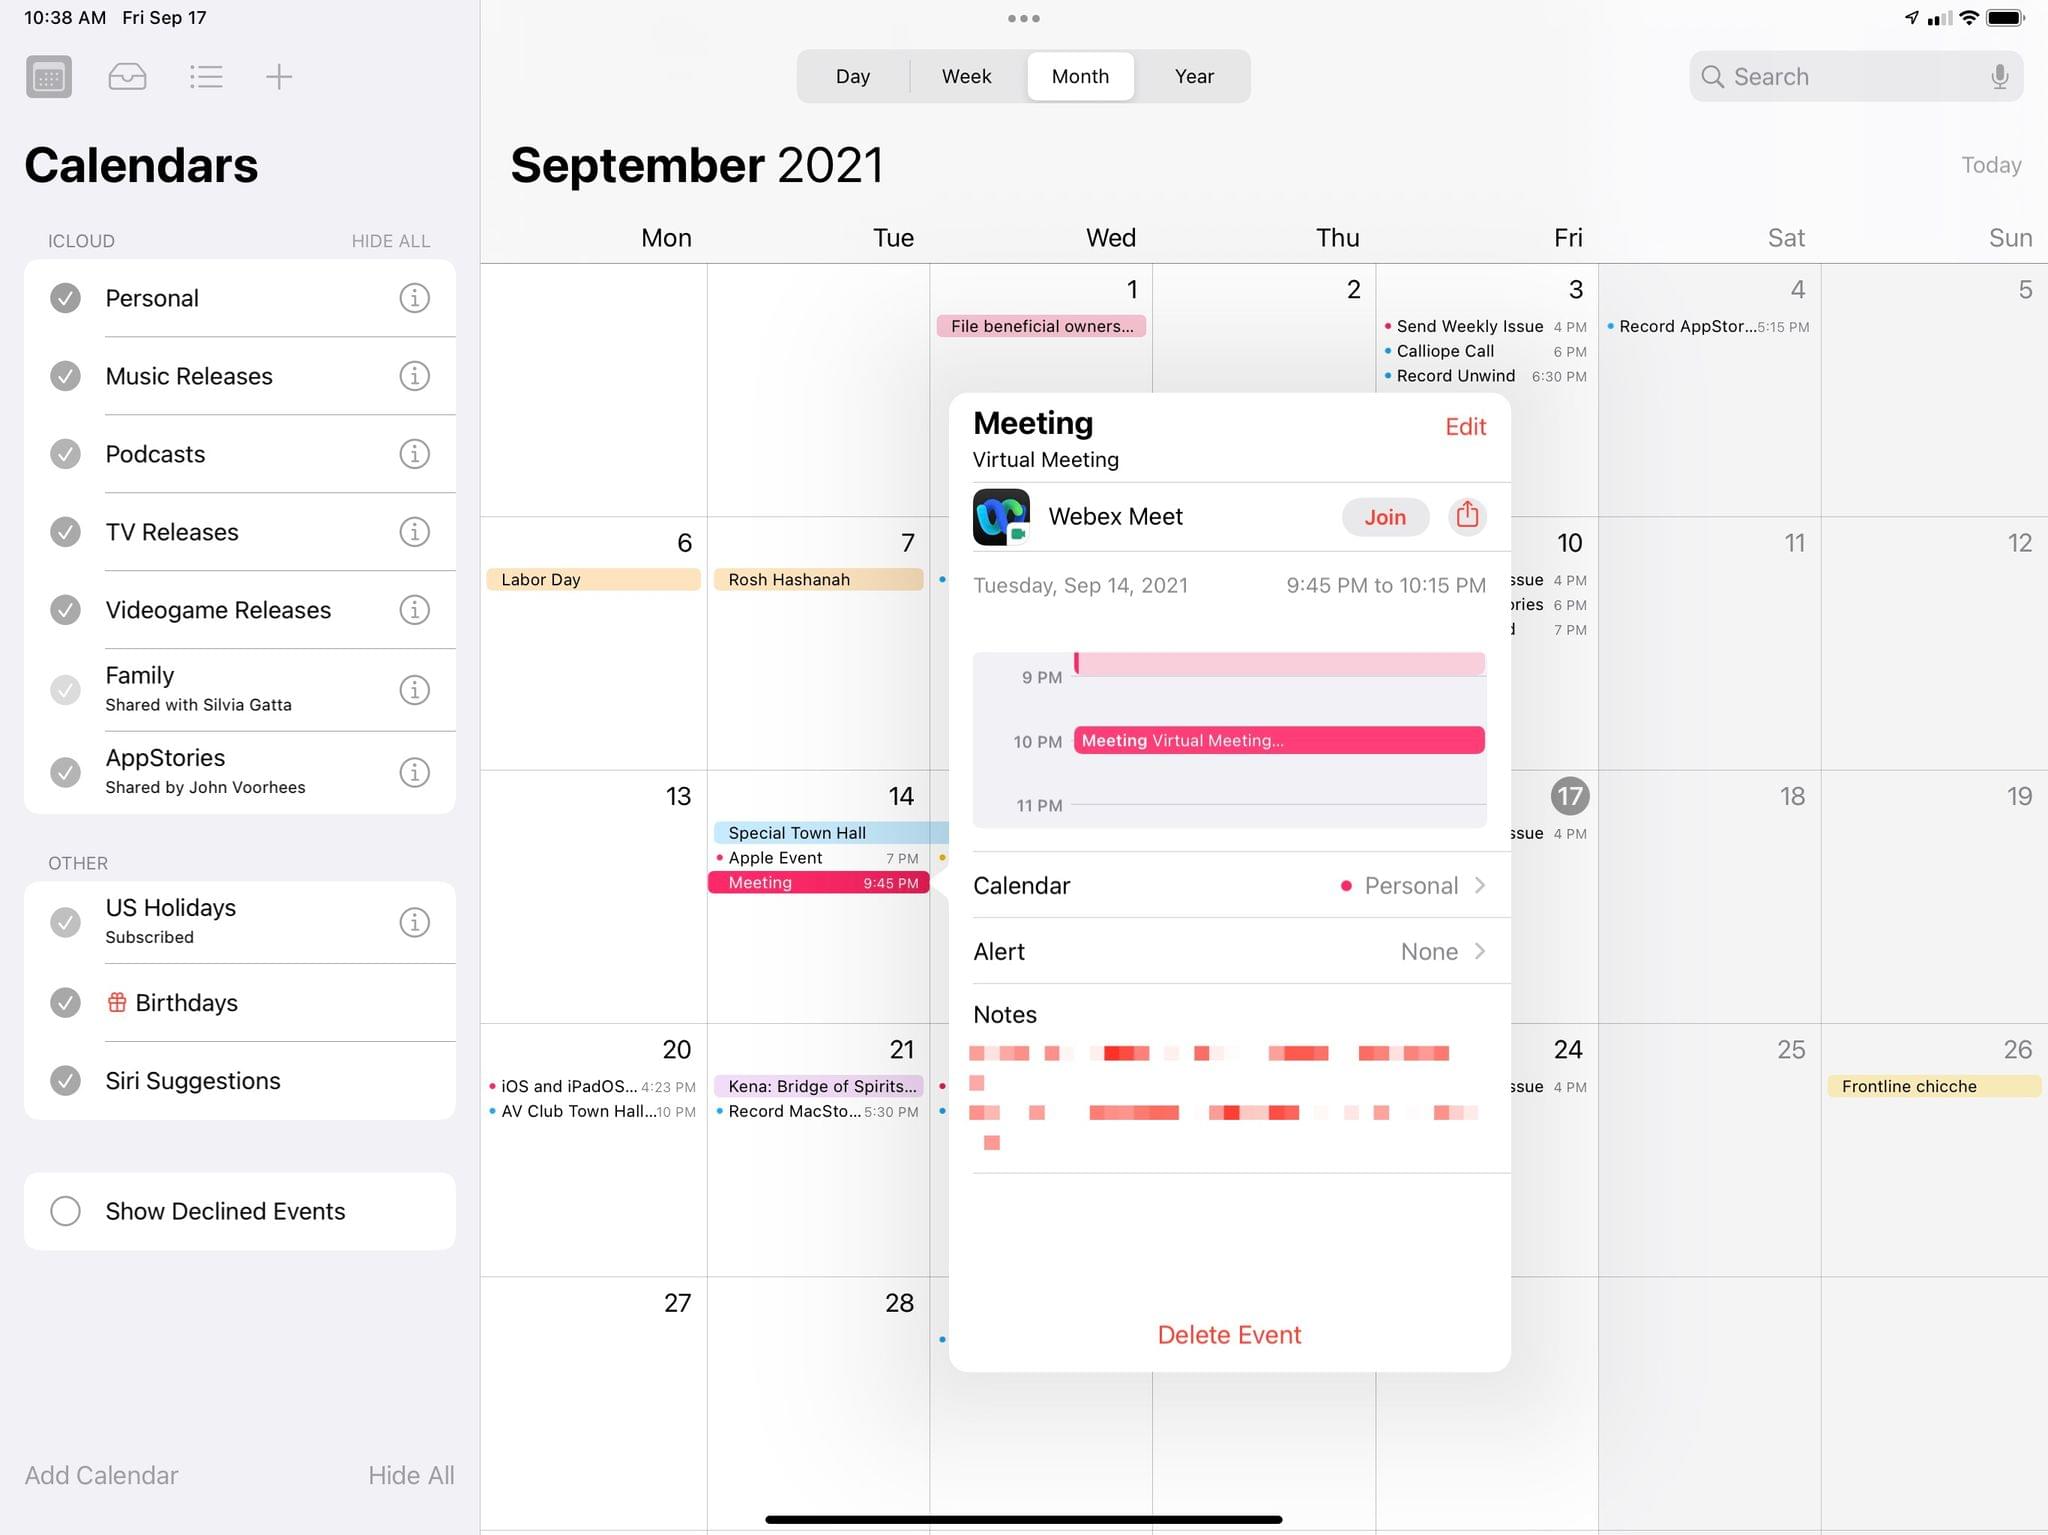 WebEx is among the supported services in the updated Calendar app.